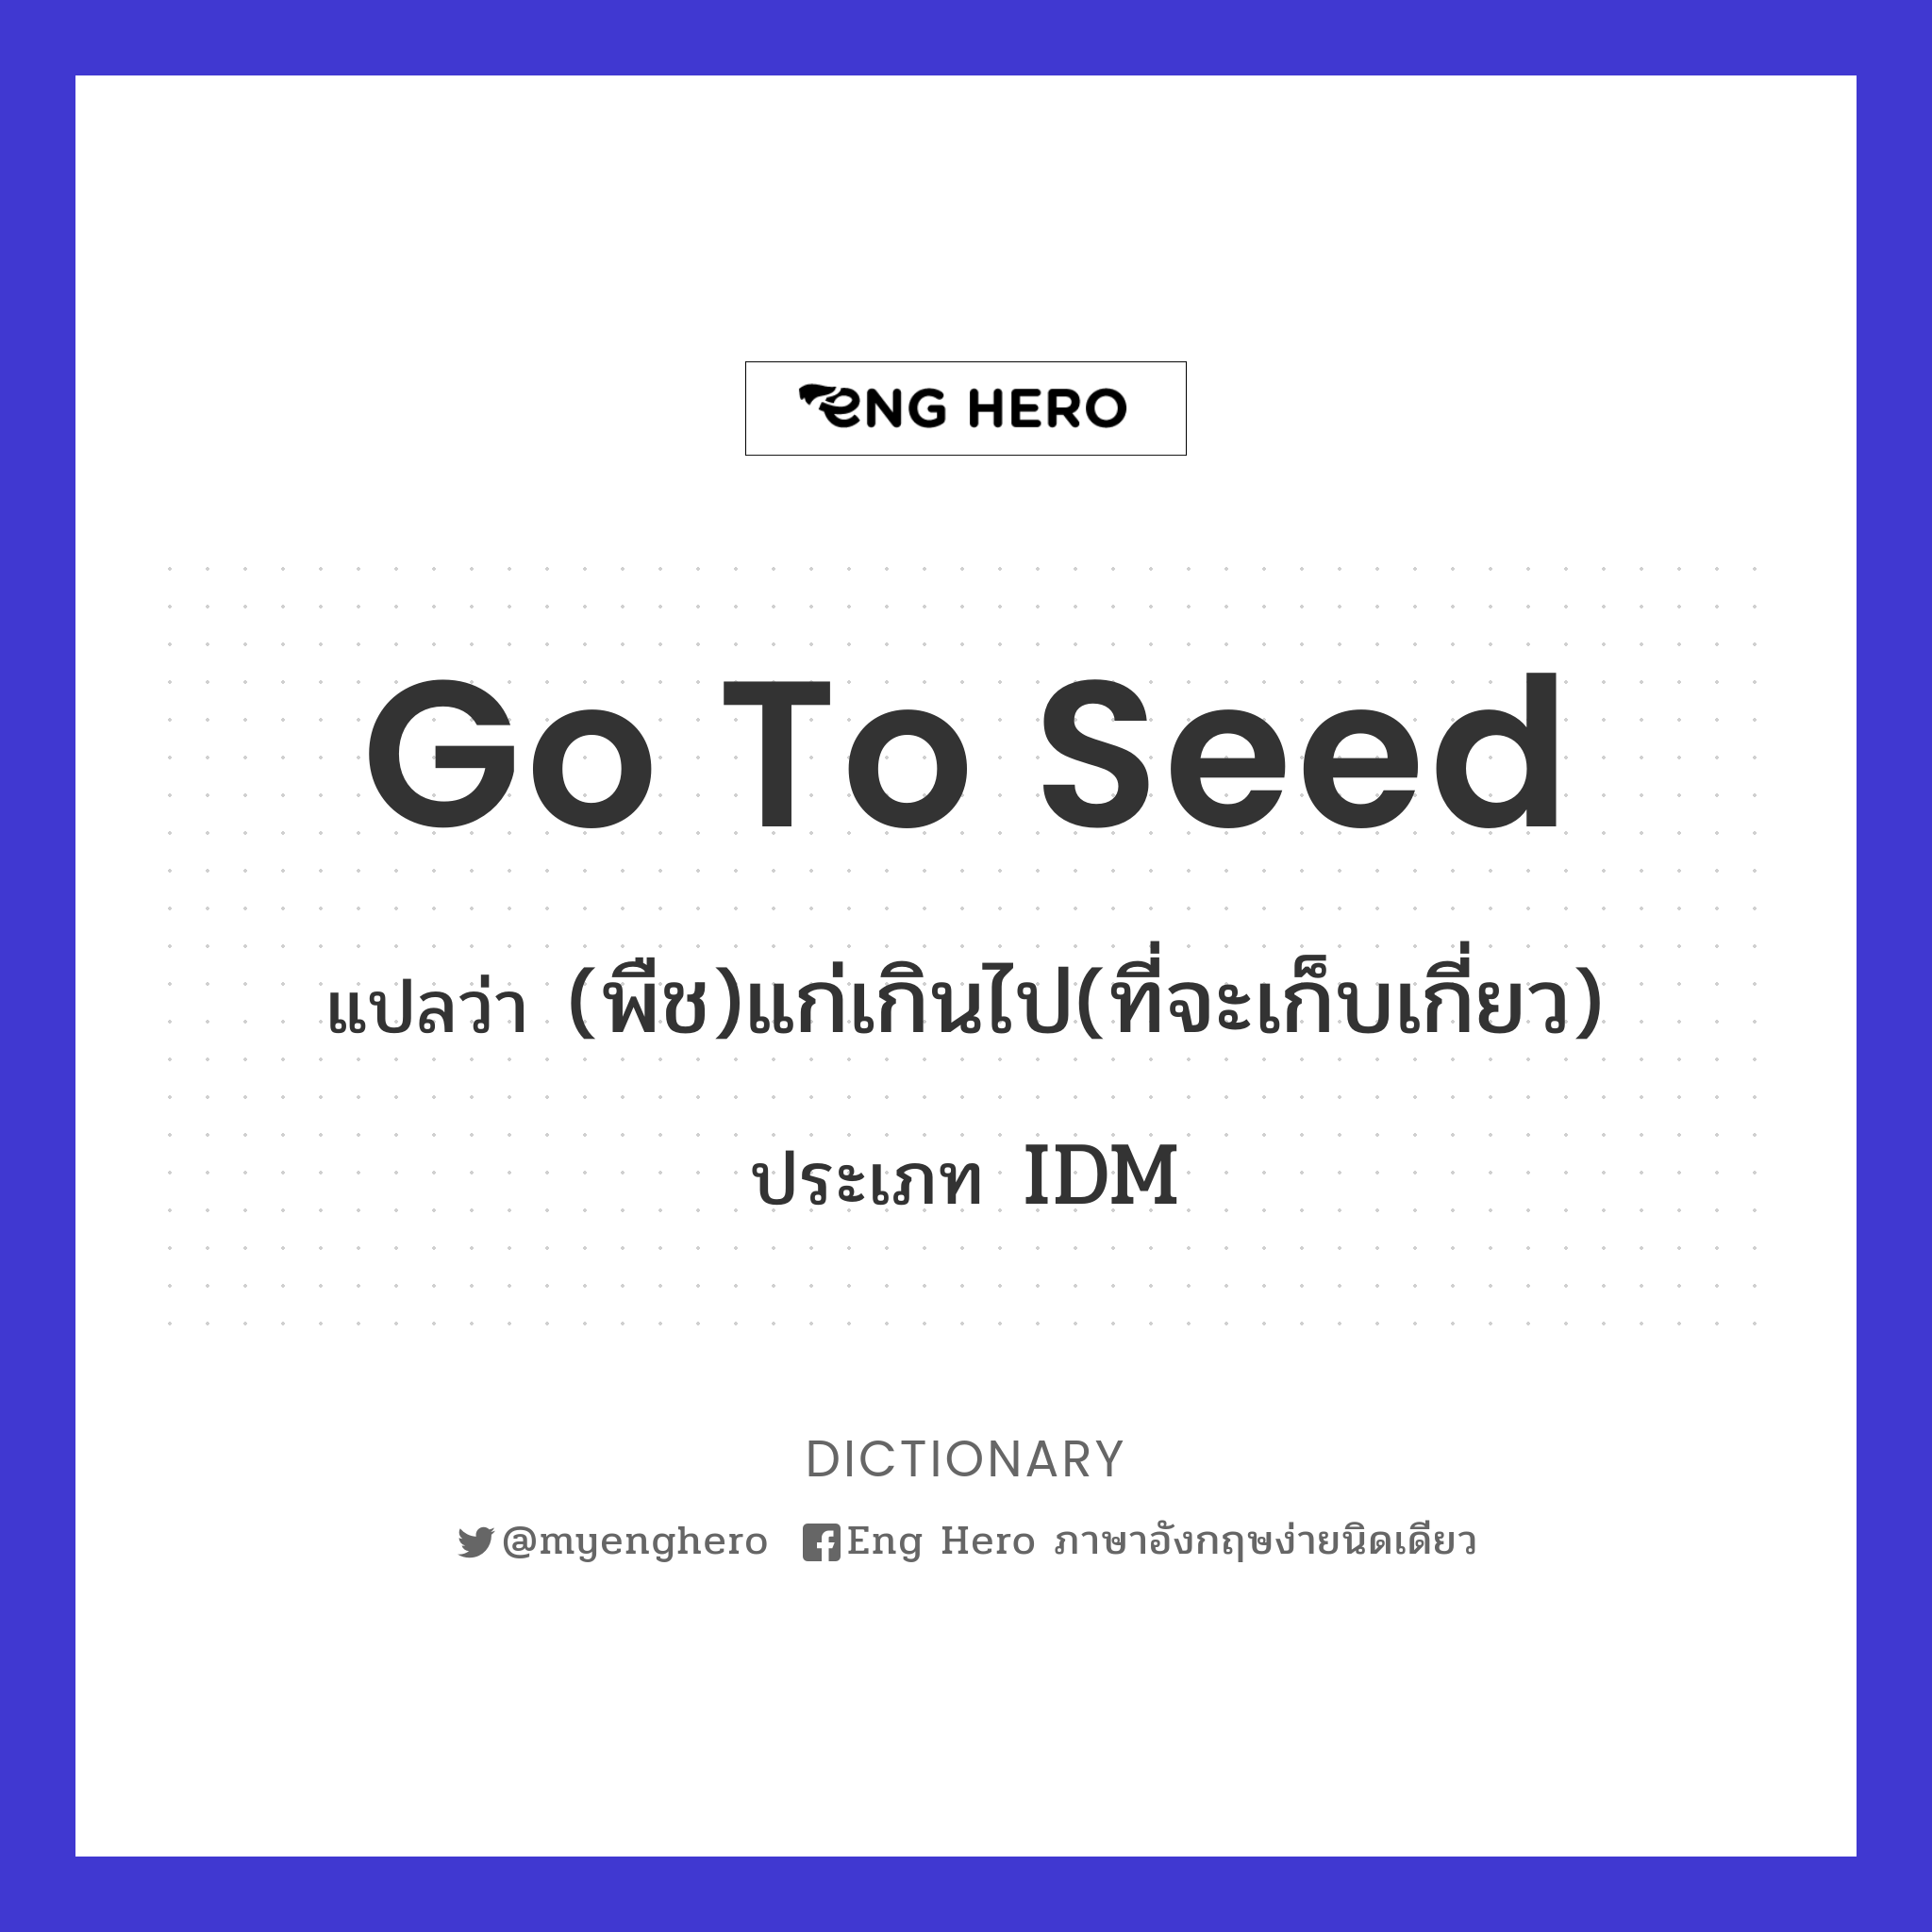 go to seed